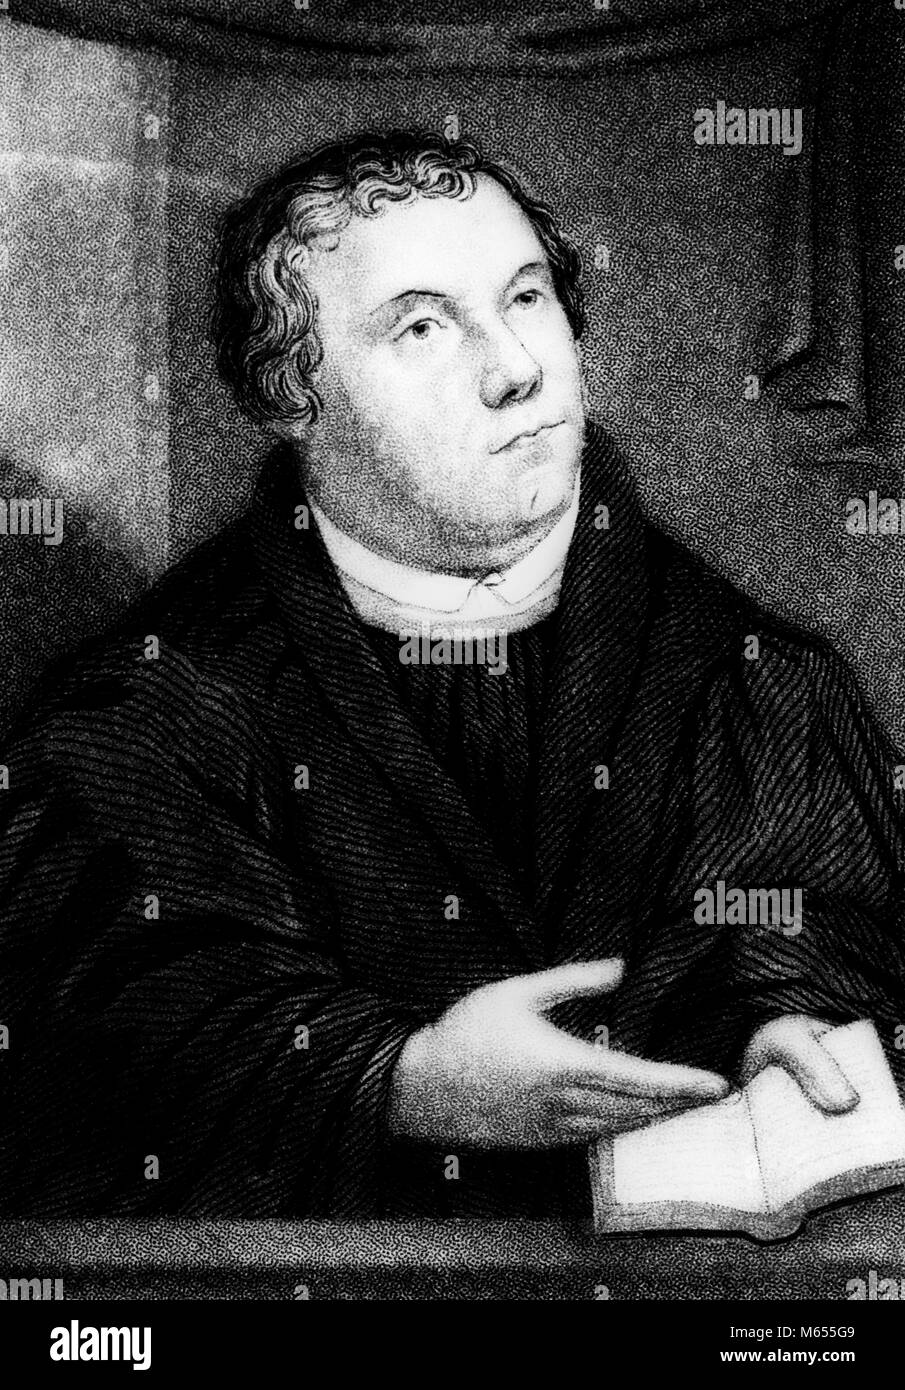 PORTRAIT ENGRAVING MARTIN LUTHER GERMAN RELIGIOUS LEADER REFORMATION PROTESTANT LUTHERAN - a8191 HAR001 HARS 1530 AUGSBURG B&W BLACK AND WHITE CATHOLIC CAUCASIAN ETHNICITY CONFESSION EXCOMMUNICATED FRIAR OLD FASHIONED PERSONS PROTESTANT PROTESTANT REFORMATION REFORMATION TRANSLATED VERNACULAR Stock Photo